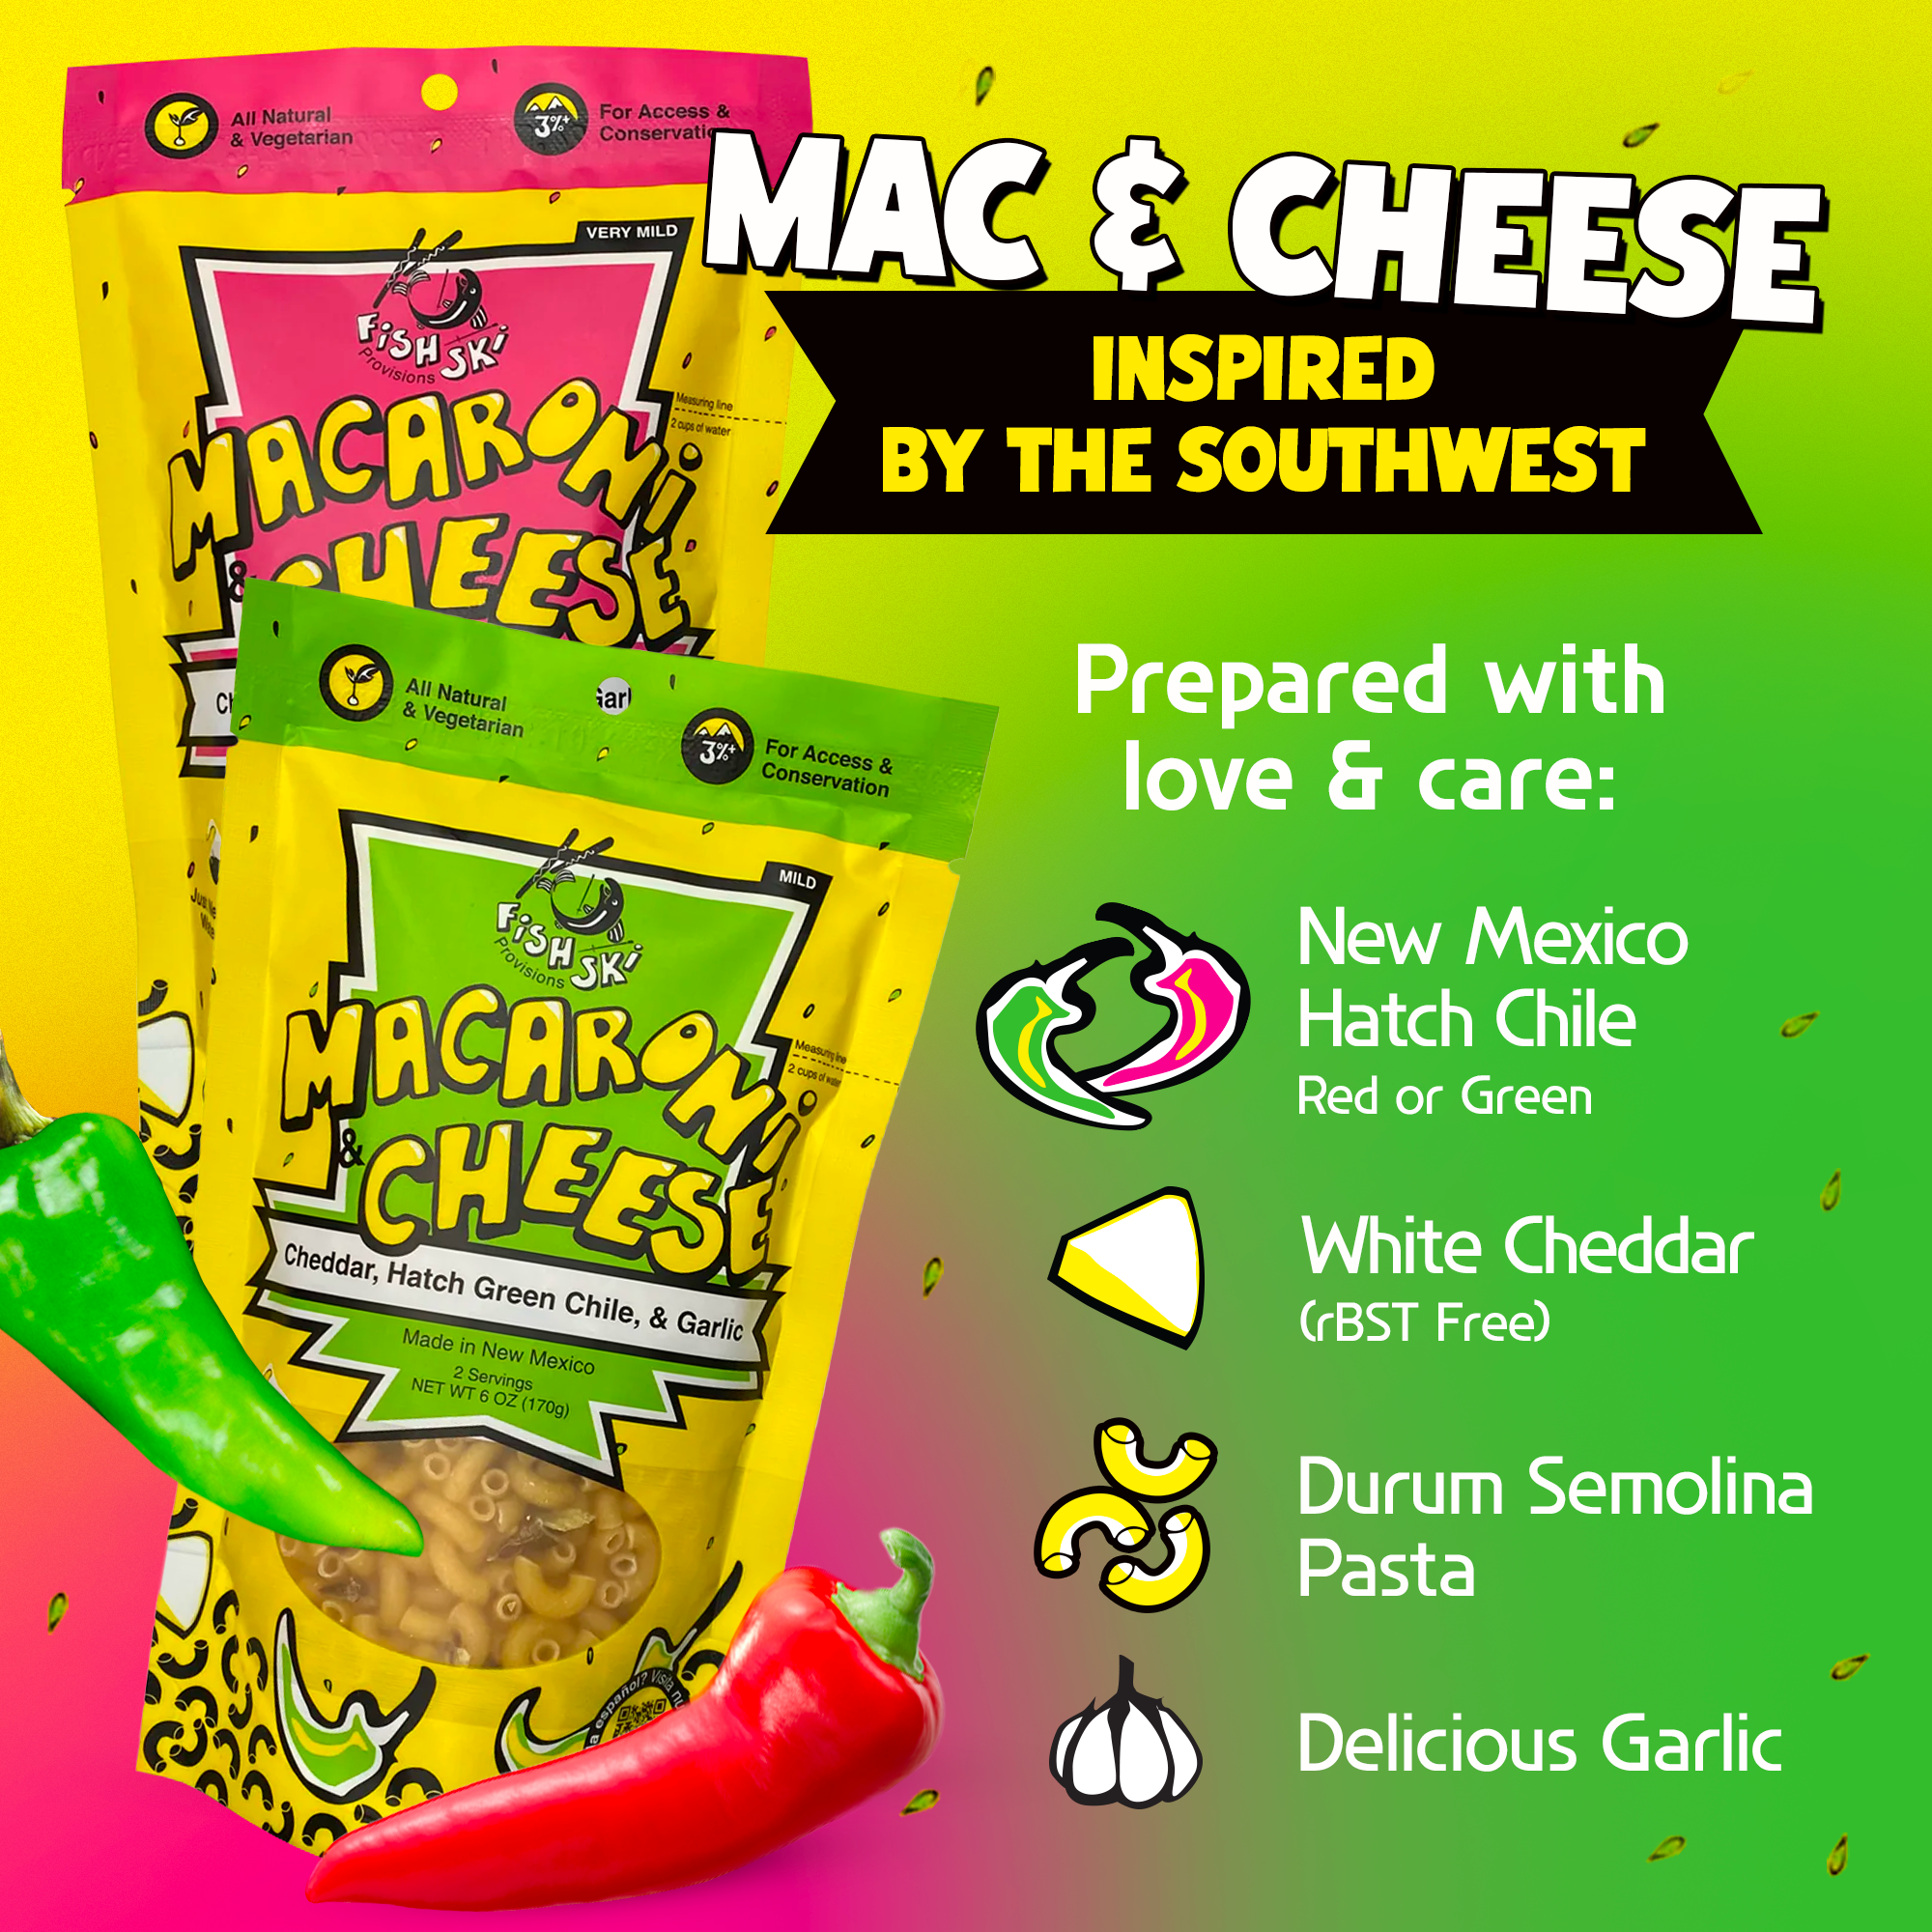 Macaroni and Cheese with Hatch Green and Red Chile + Cheddar Cheese + Garlic, Variety Pack, by FishSki Provisions, 6 oz bags, 2 pack - image 5 of 5